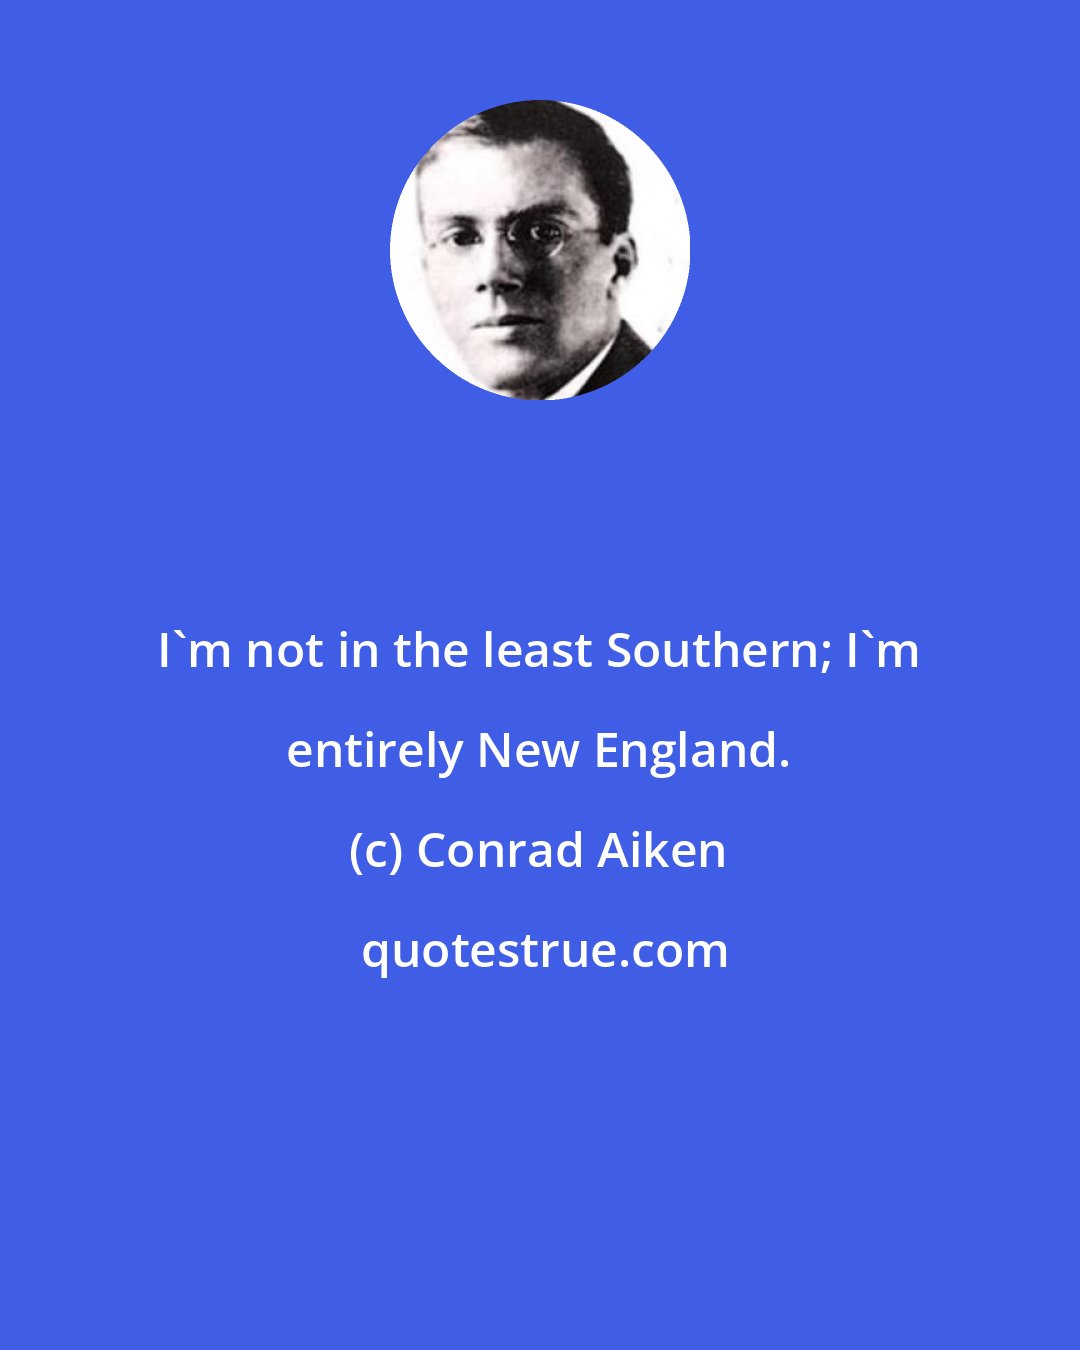 Conrad Aiken: I'm not in the least Southern; I'm entirely New England.